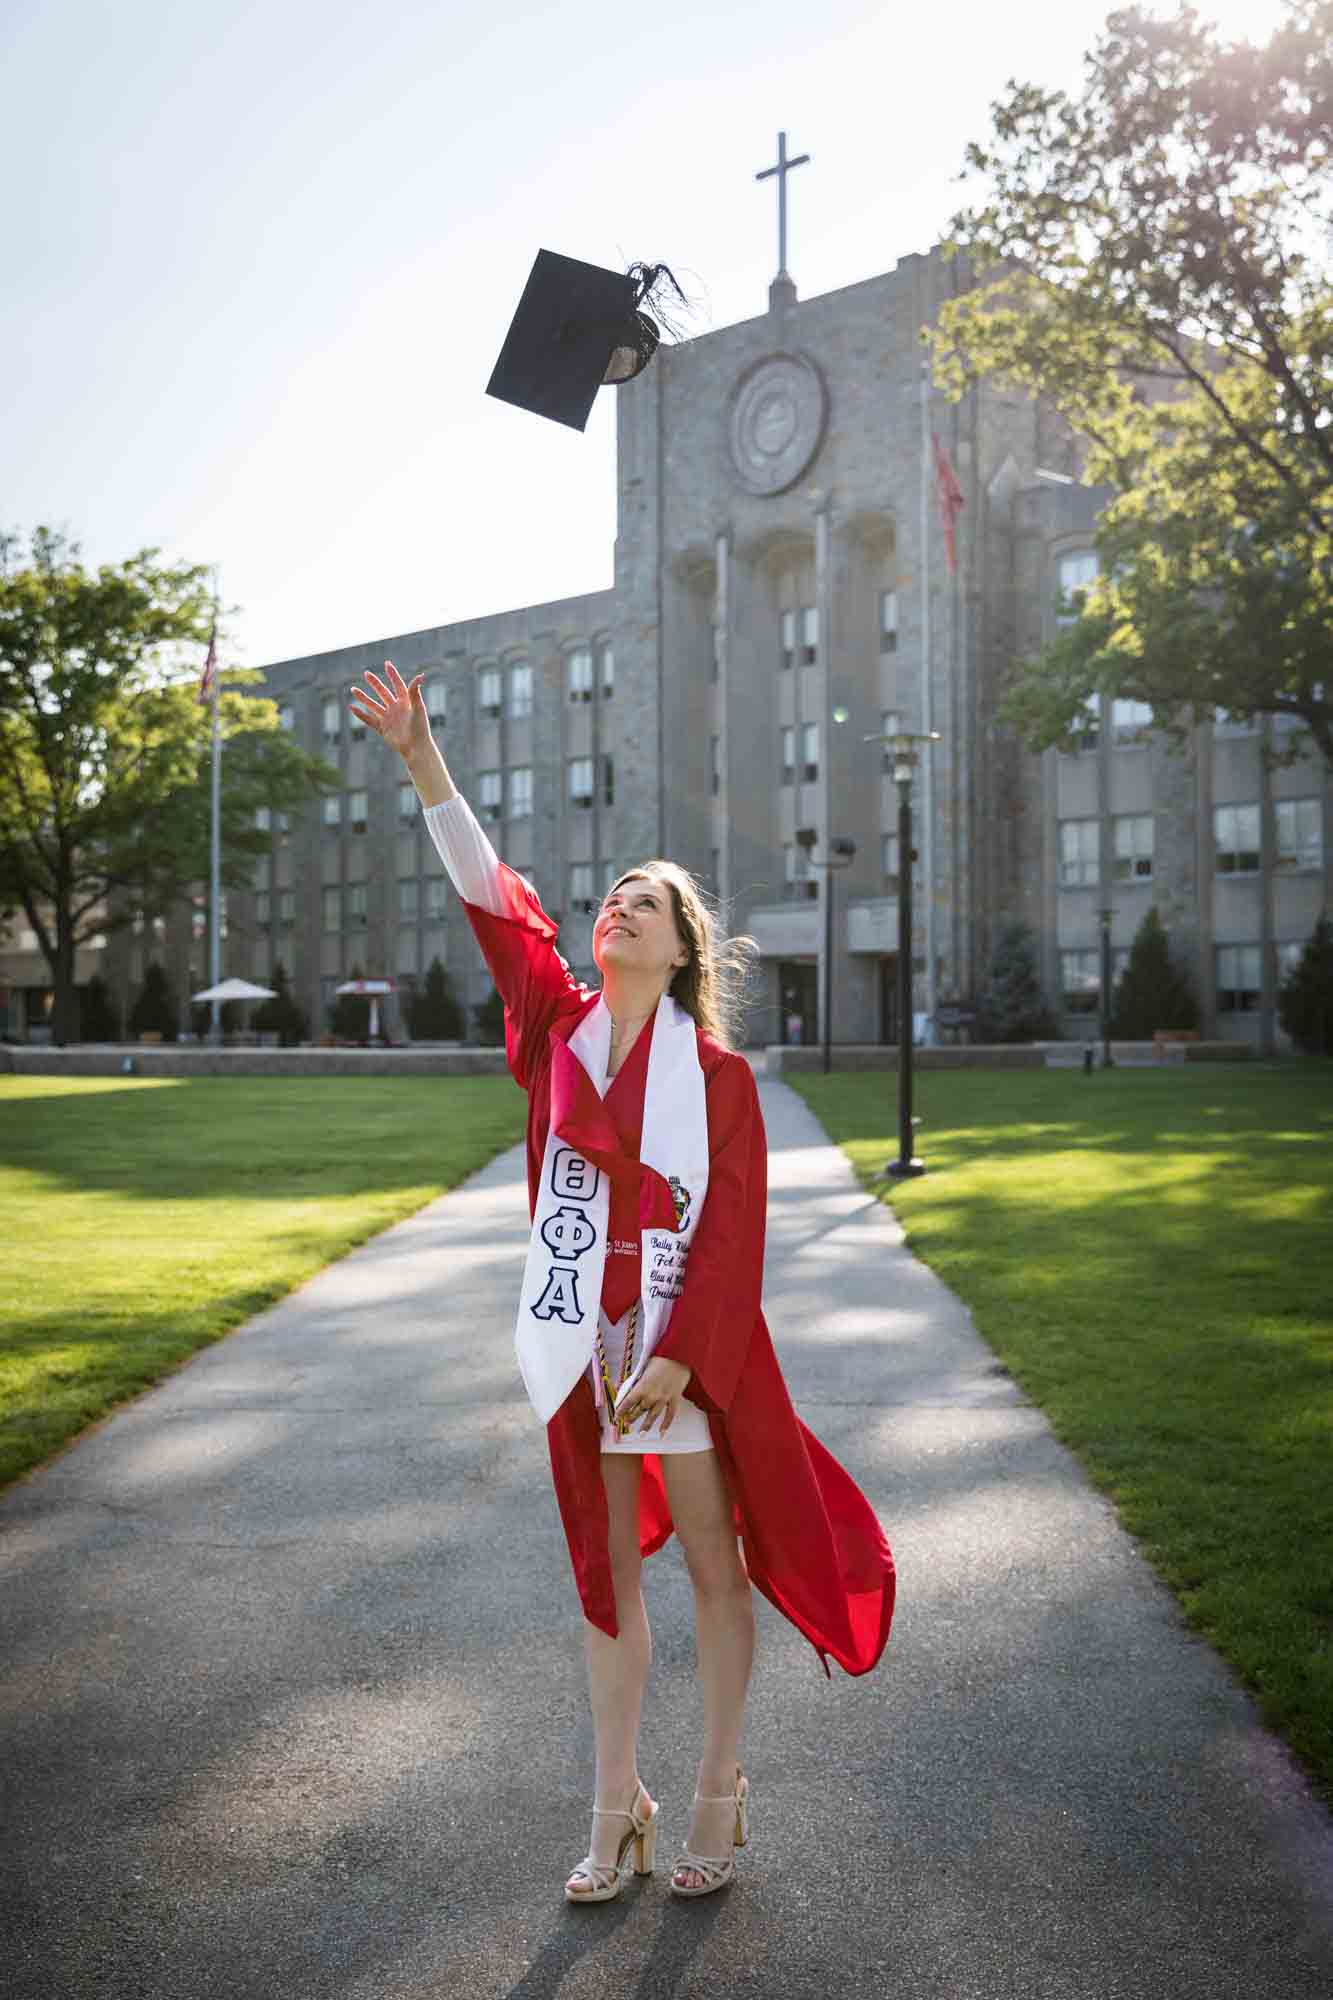 Female graduate wearing red robe and white sash throwing cap in air during a St. John’s University graduate portrait session